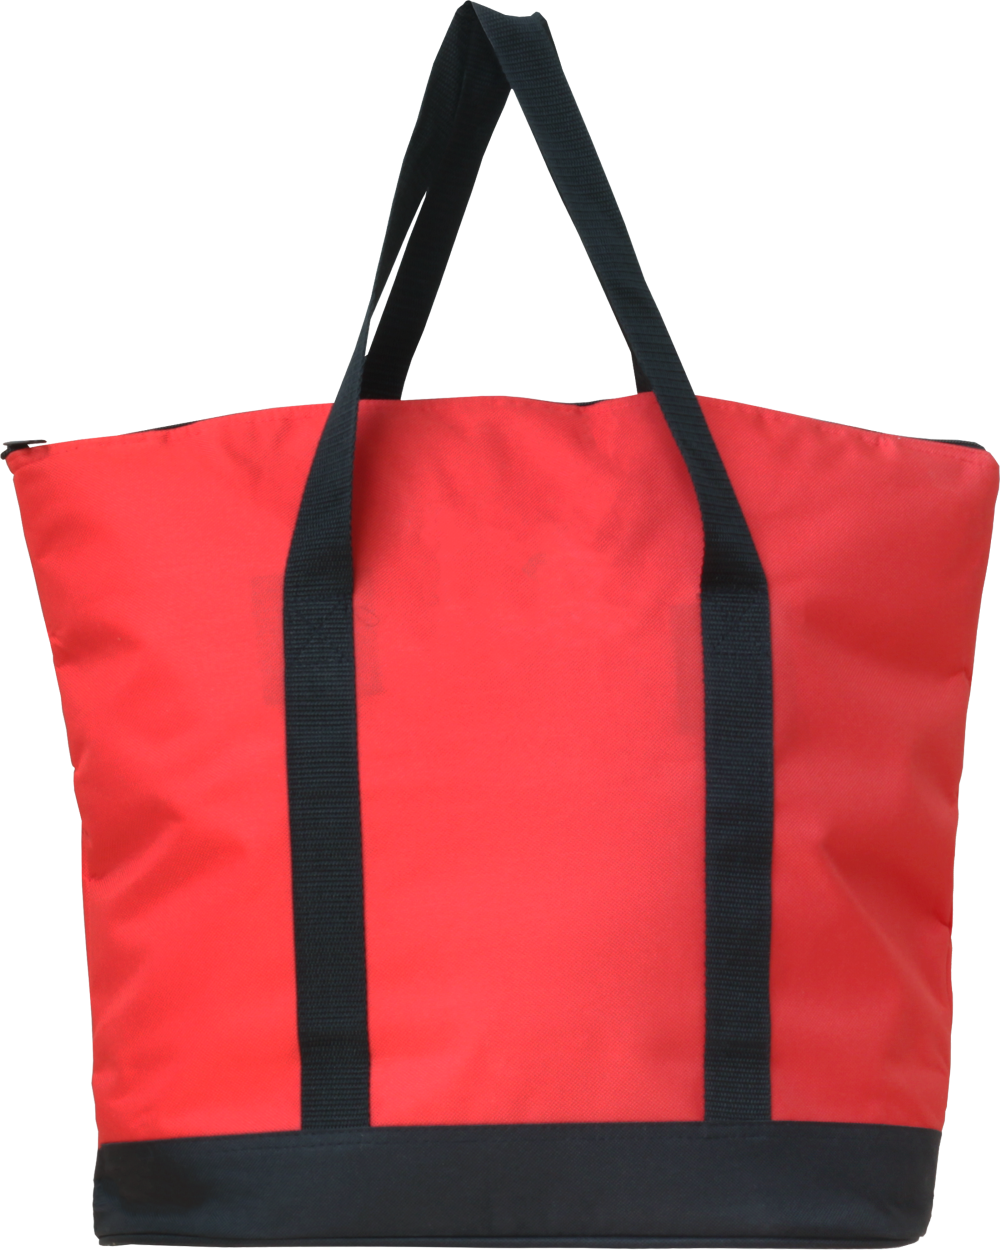 https://www.redibagusa.com/wp-content/uploads/2020/07/Cooler-Bag-Small-Red-300ppi-2.png